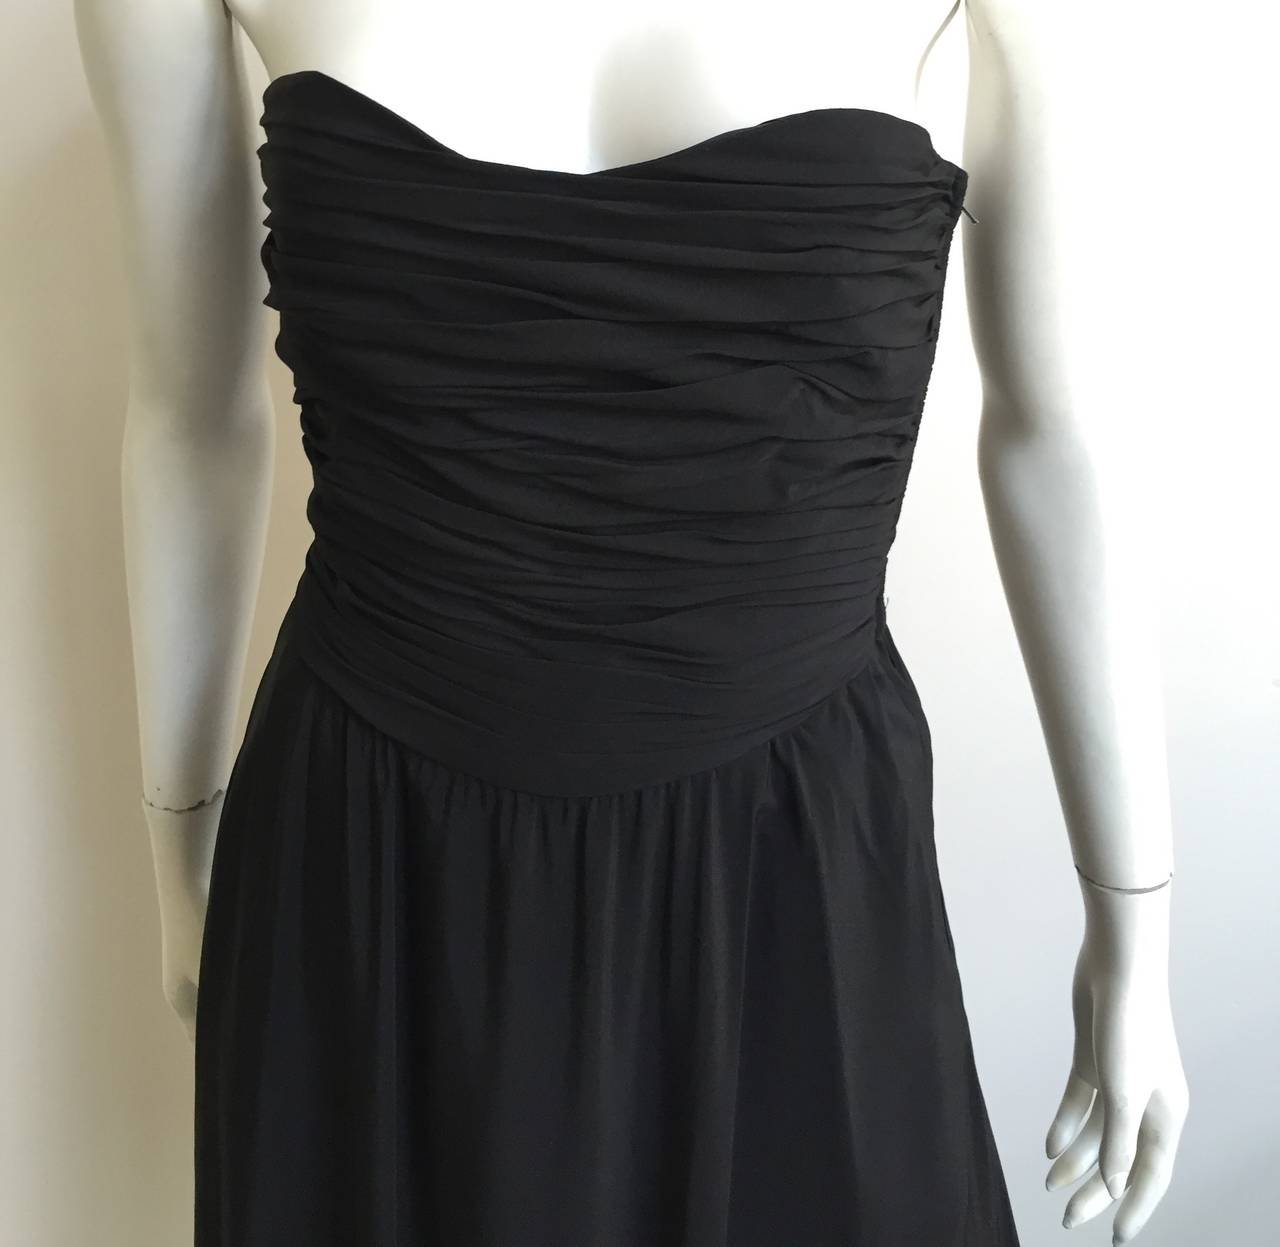 Albert Nipon for Neiman Marcus 1980s black silk strapless dress with pockets original size 8 but fits like a modern 4.  Please see & use measurements to measure to make sure this dress will fit you to perfection.
This strapless evening dress with